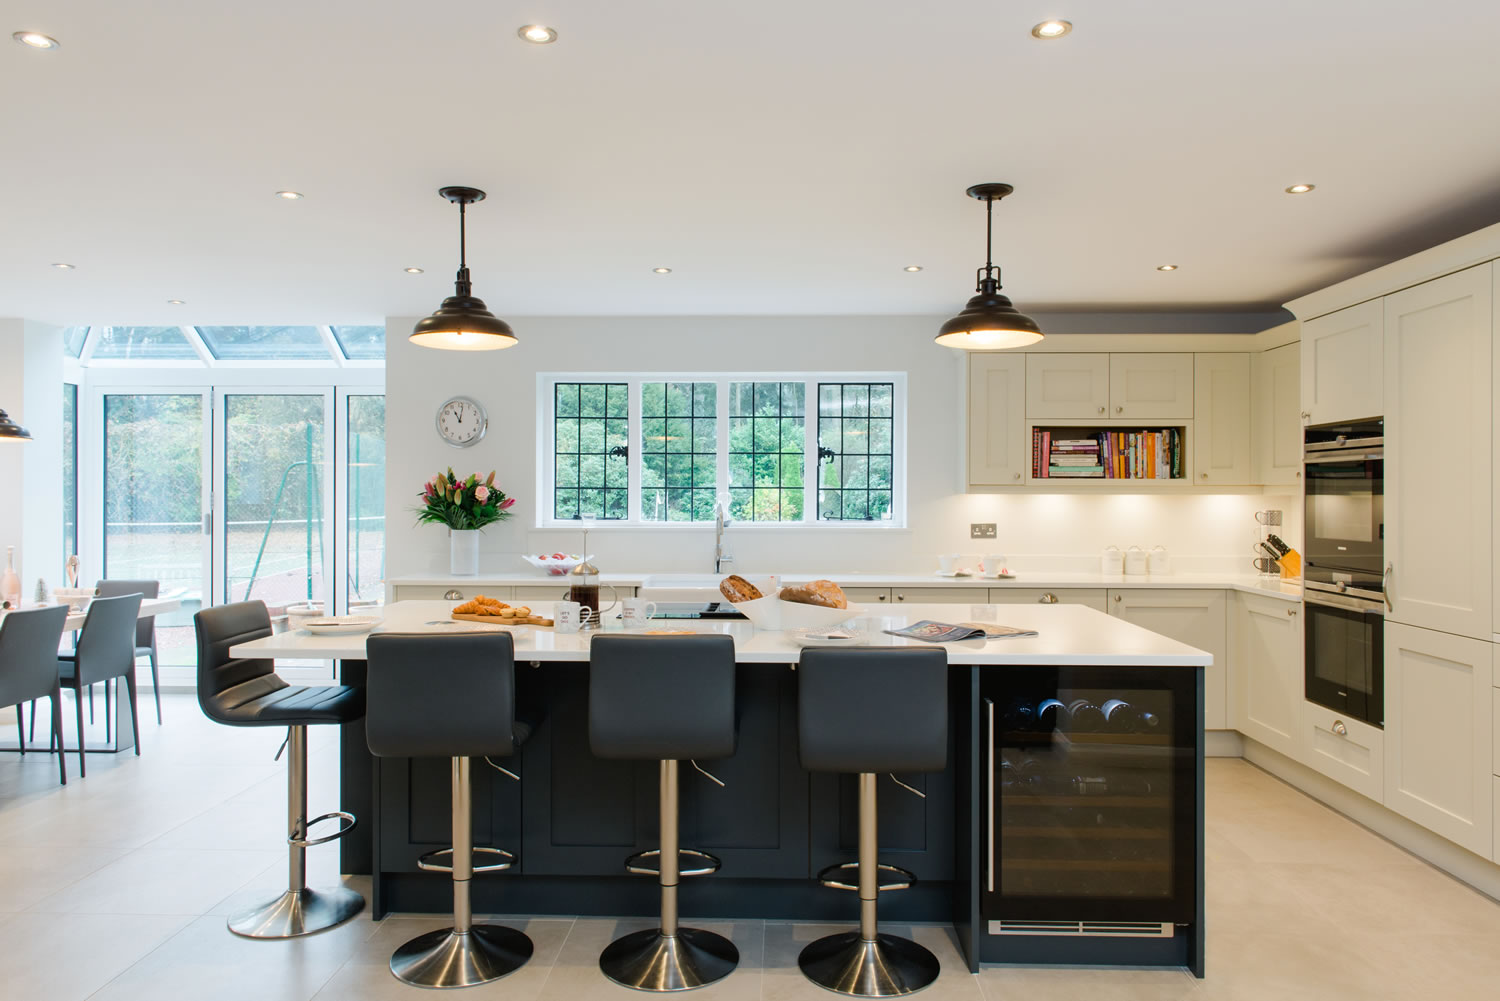 Does a new kitchen add value to your home?